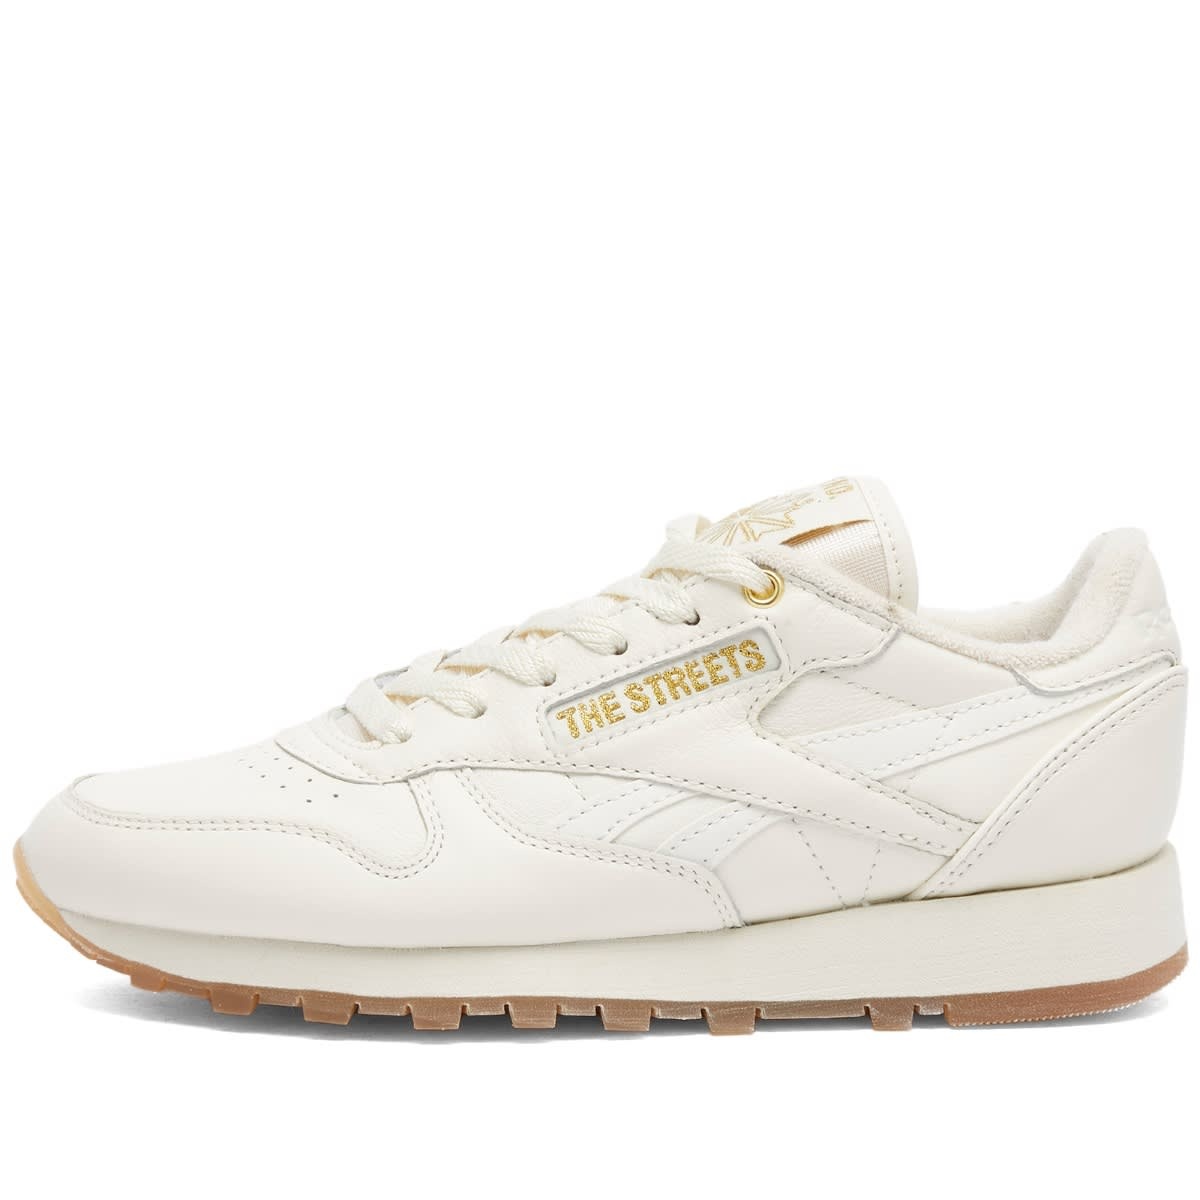 Reebok x The Streets by END. Classic Leather - 2